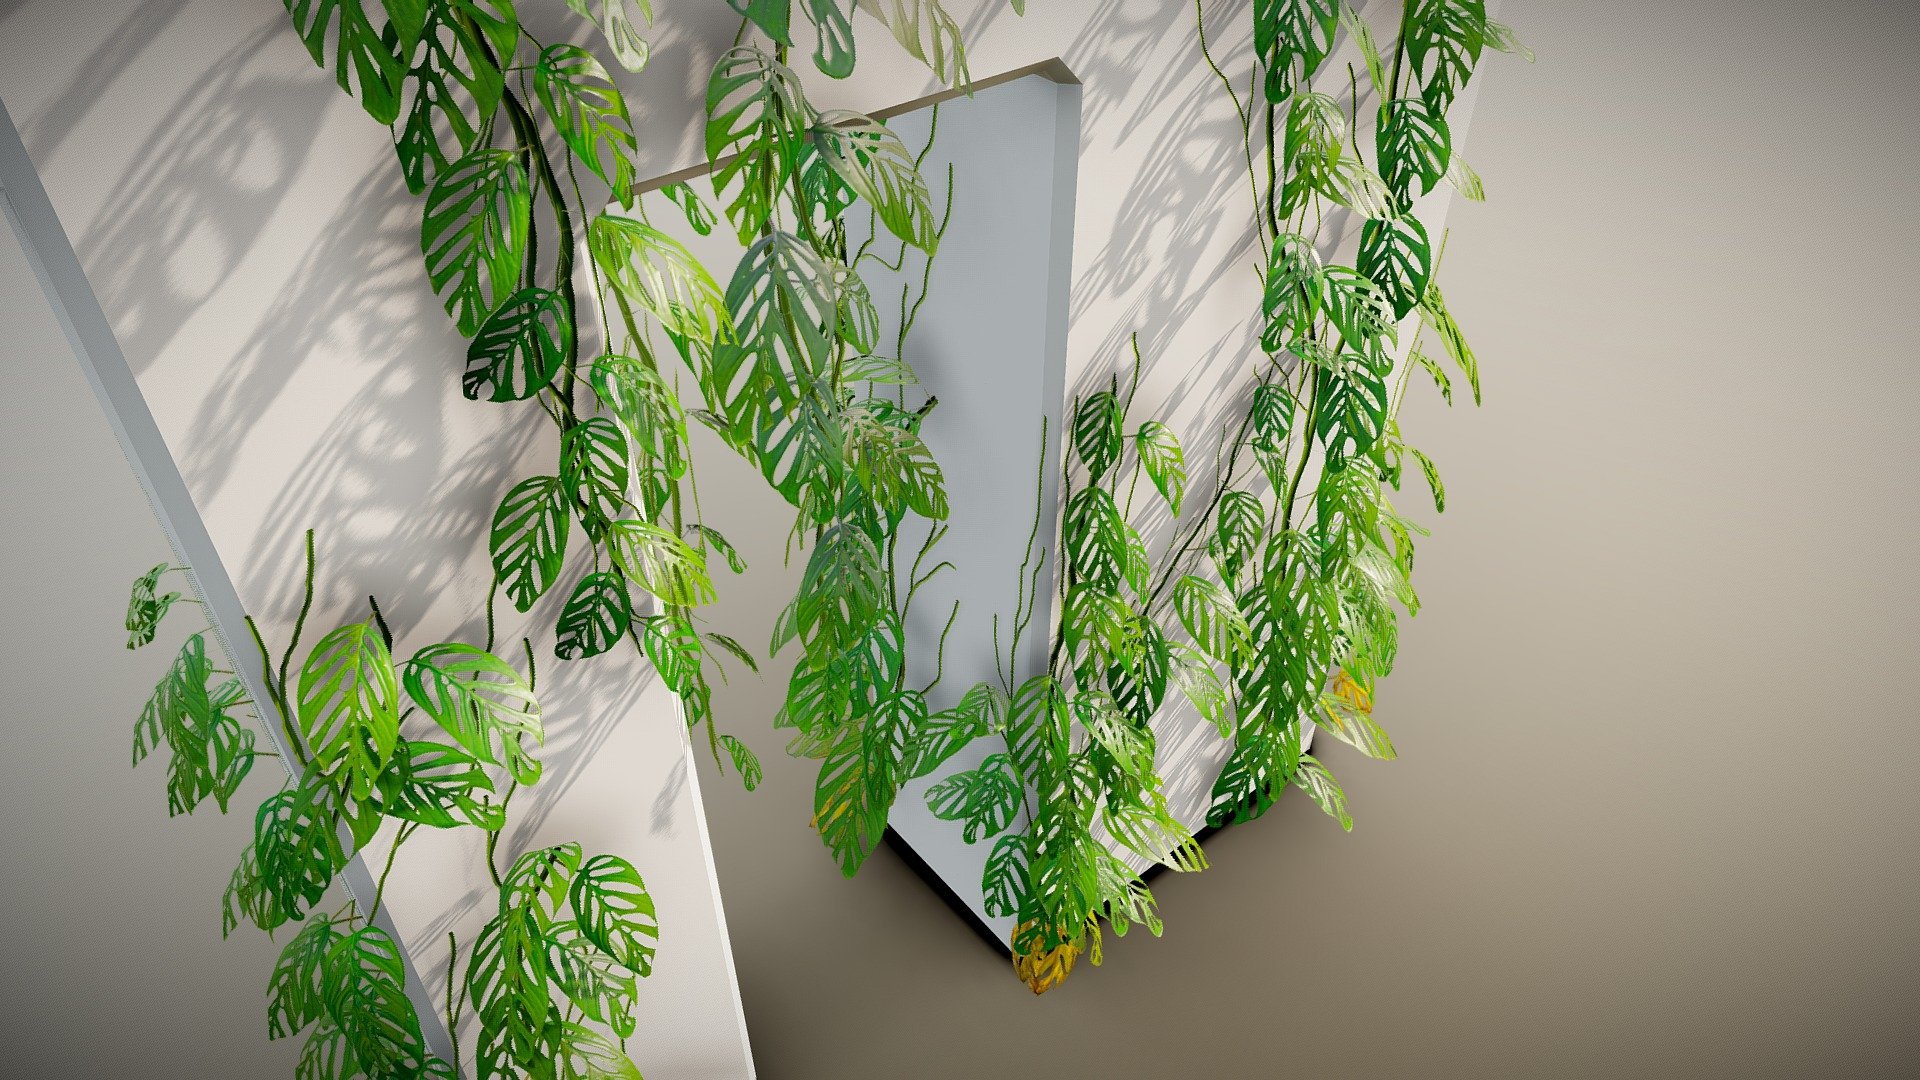 Climbing Tropical Plant.

Details:

Low Poly Asset (Game Ready)

Textures are 4K resolution (.tif alpha channel)

4 variations (LODs)

Maps Sample:  https://imgur.com/WbeObSc

Unity Render: https://imgur.com/jfHiN8G

New Sample Project: https://www.artstation.com/artwork/3omgWg - Monstera Obliqua Plant - Buy Royalty Free 3D model by Paul (@nathan.d1563) 3d model